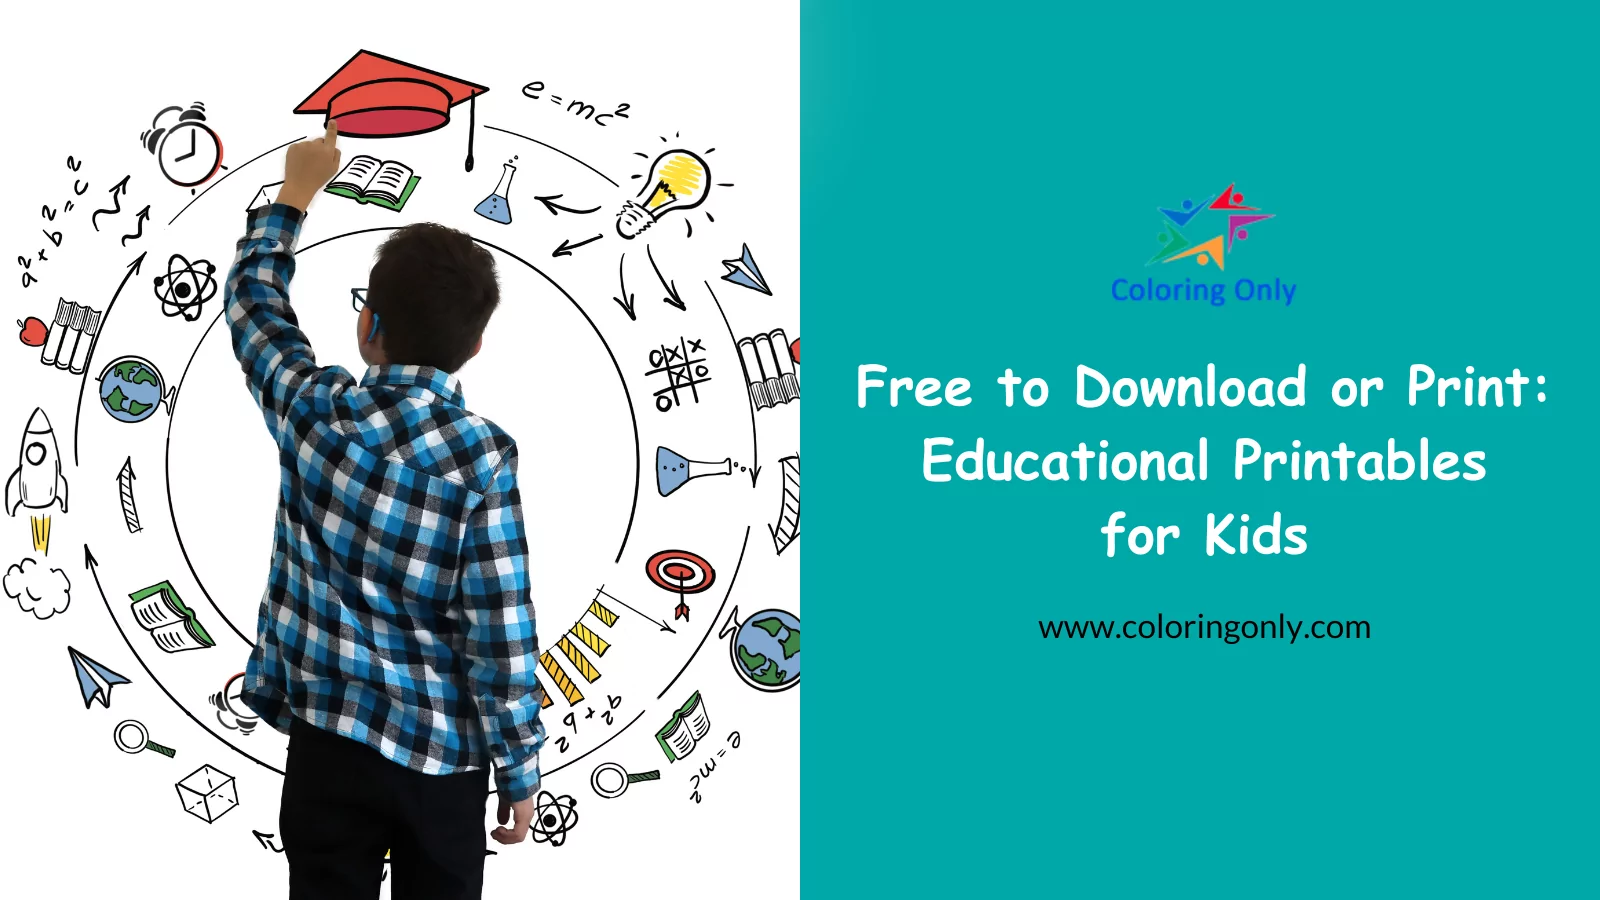 Free to Download or Print: Educational Printables for Kids